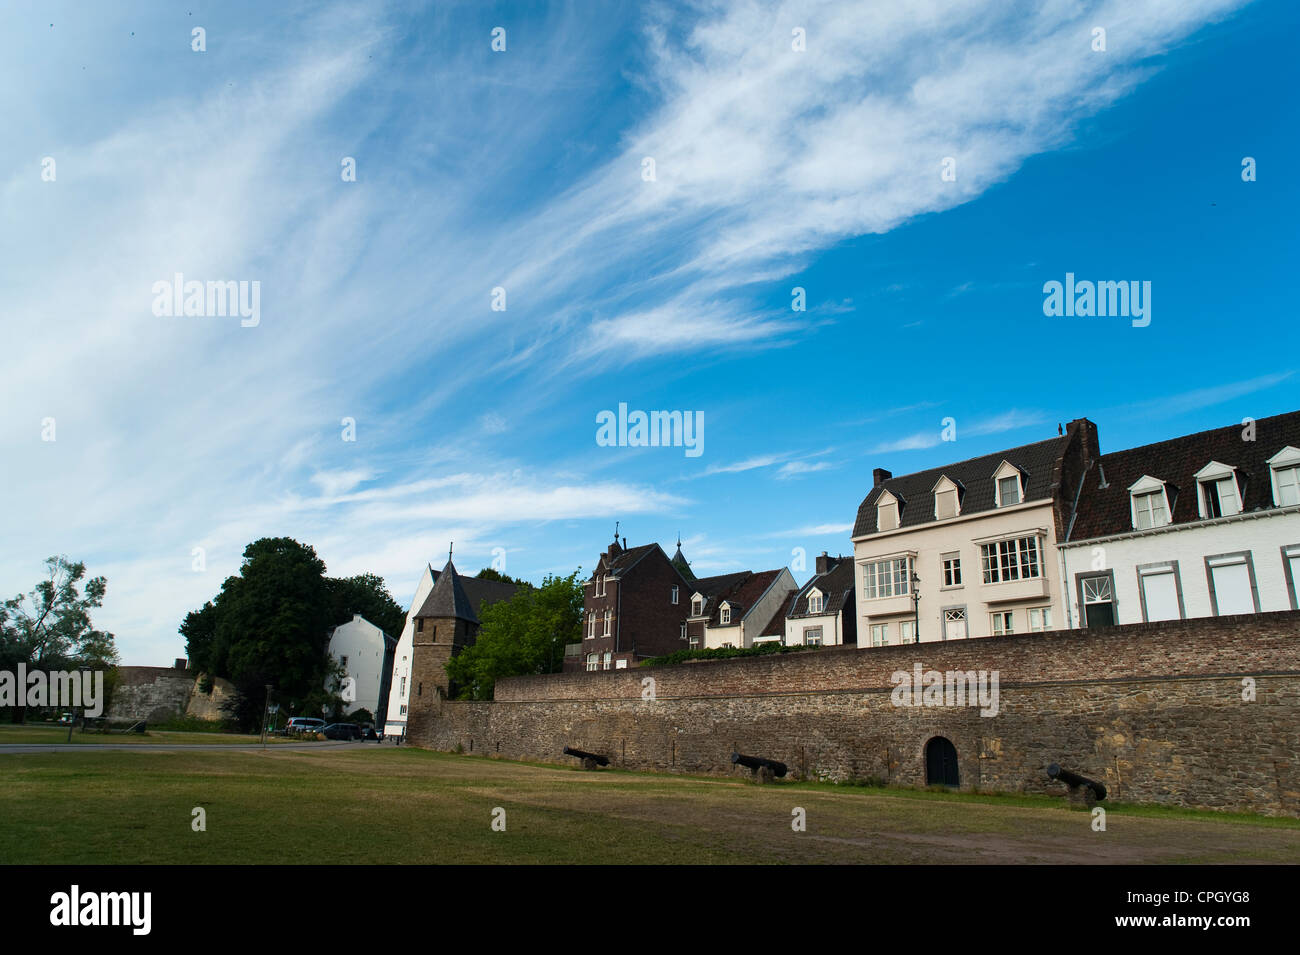 'Eerste Middeleeuwse Omwalling' (First Medieval City Wall), year 1229, Maastricht, Limburg, The Netherlands, Europe. Stock Photo